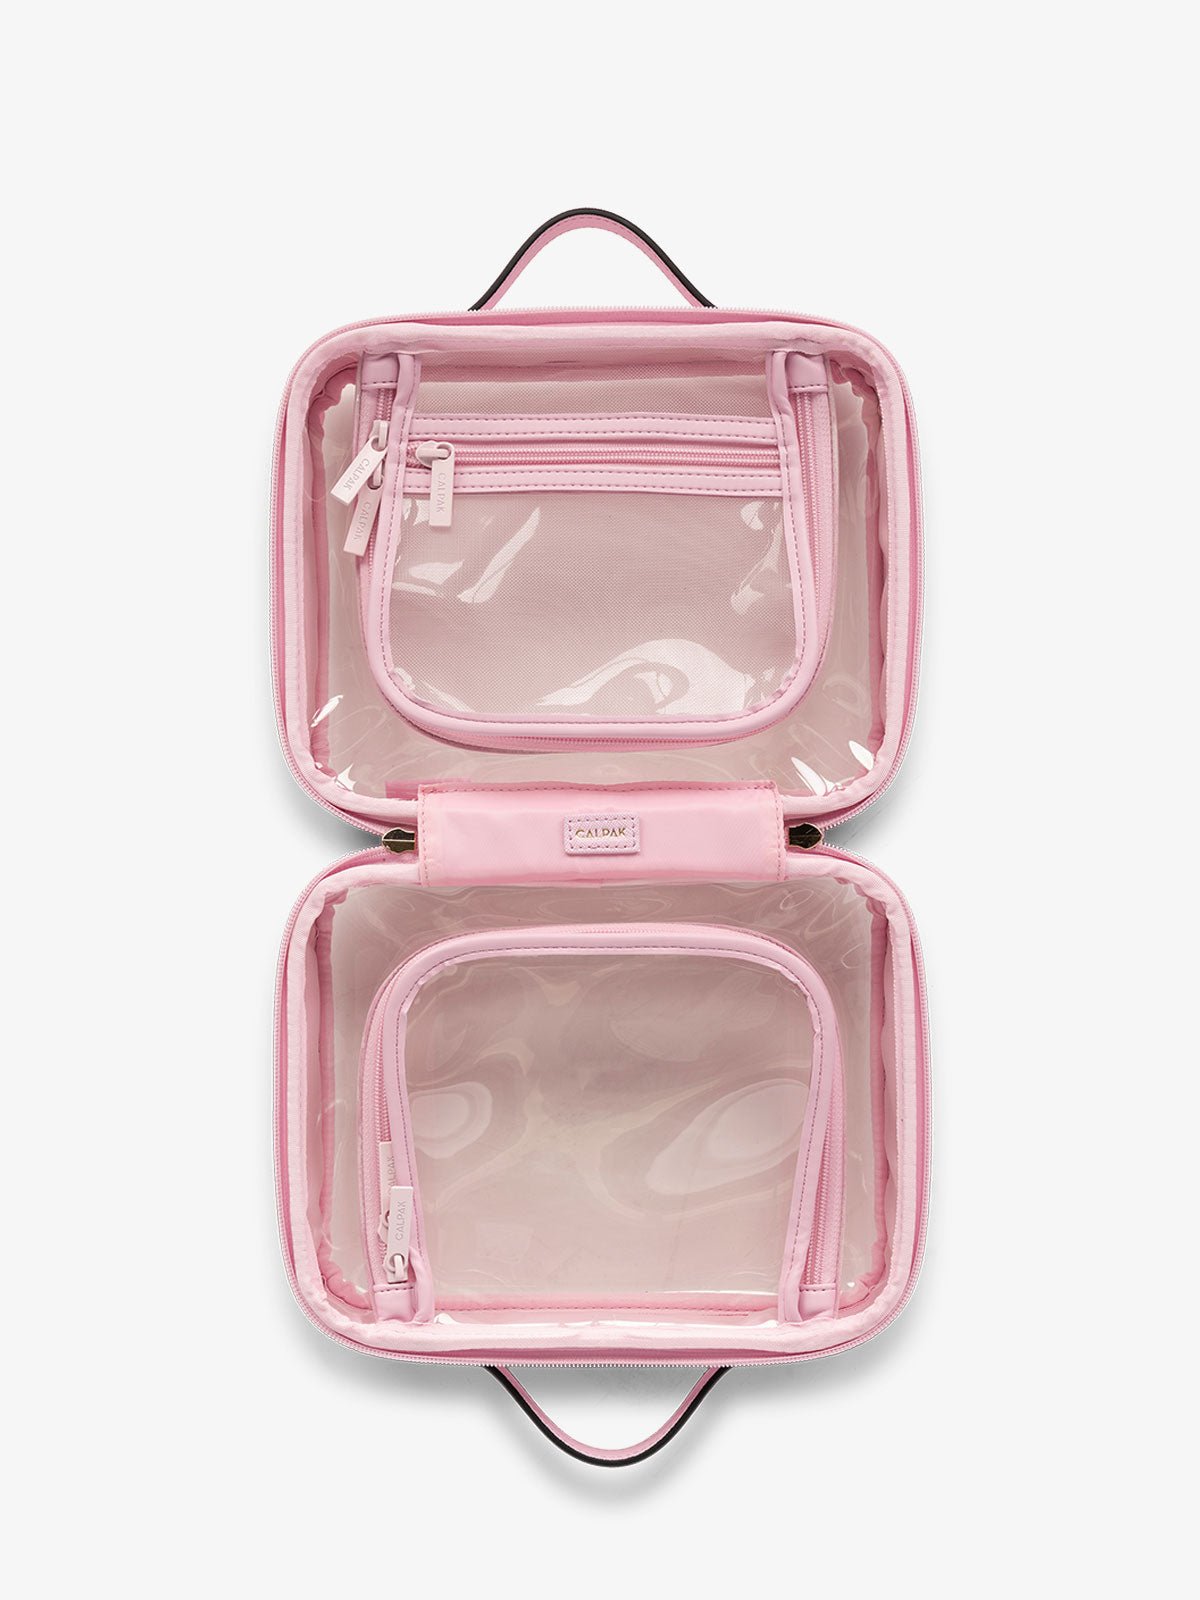 CALPAK clear travel makeup bag with zipper enclosed compartments in pink